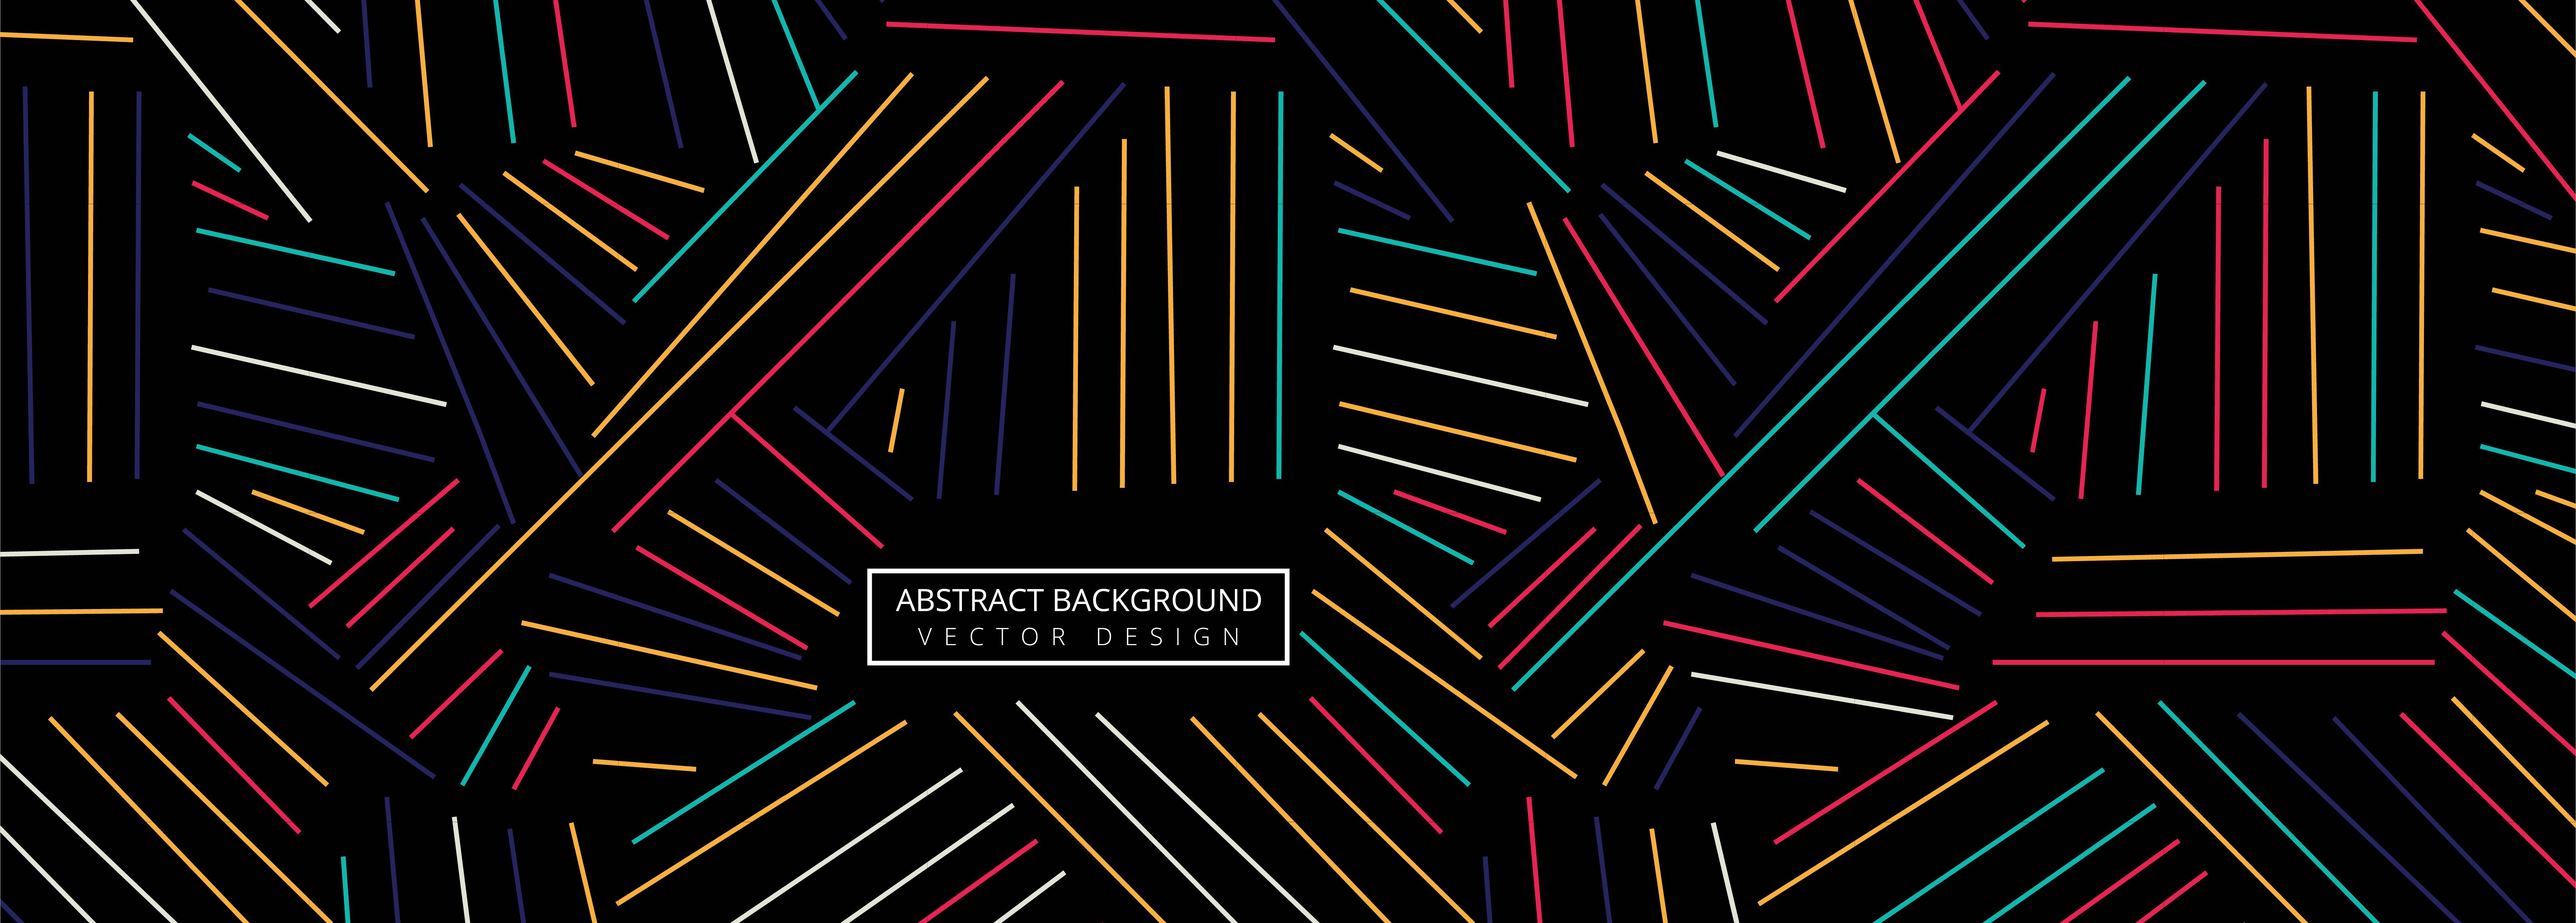 Abstract Colorful Geometric Lines Header Background Vector